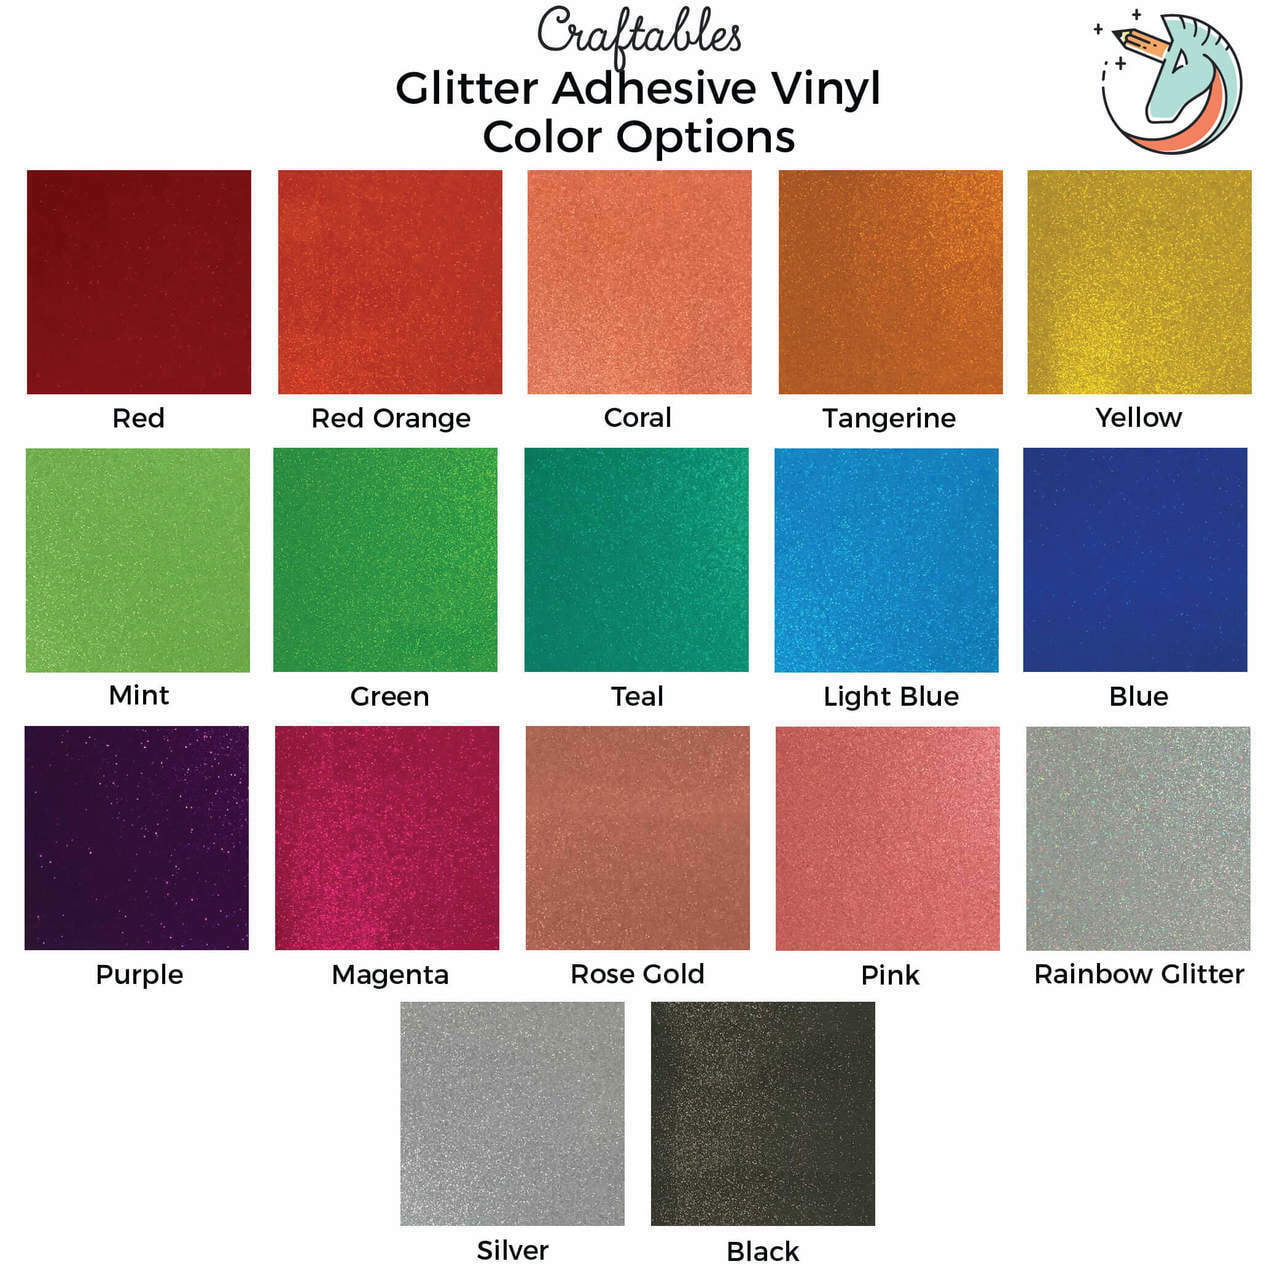 Craftables Rose Gold Glitter Adhesive Vinyl for Cricut and Craft Cutters - 12in x 12in sheets 3 Silhouette Cameo